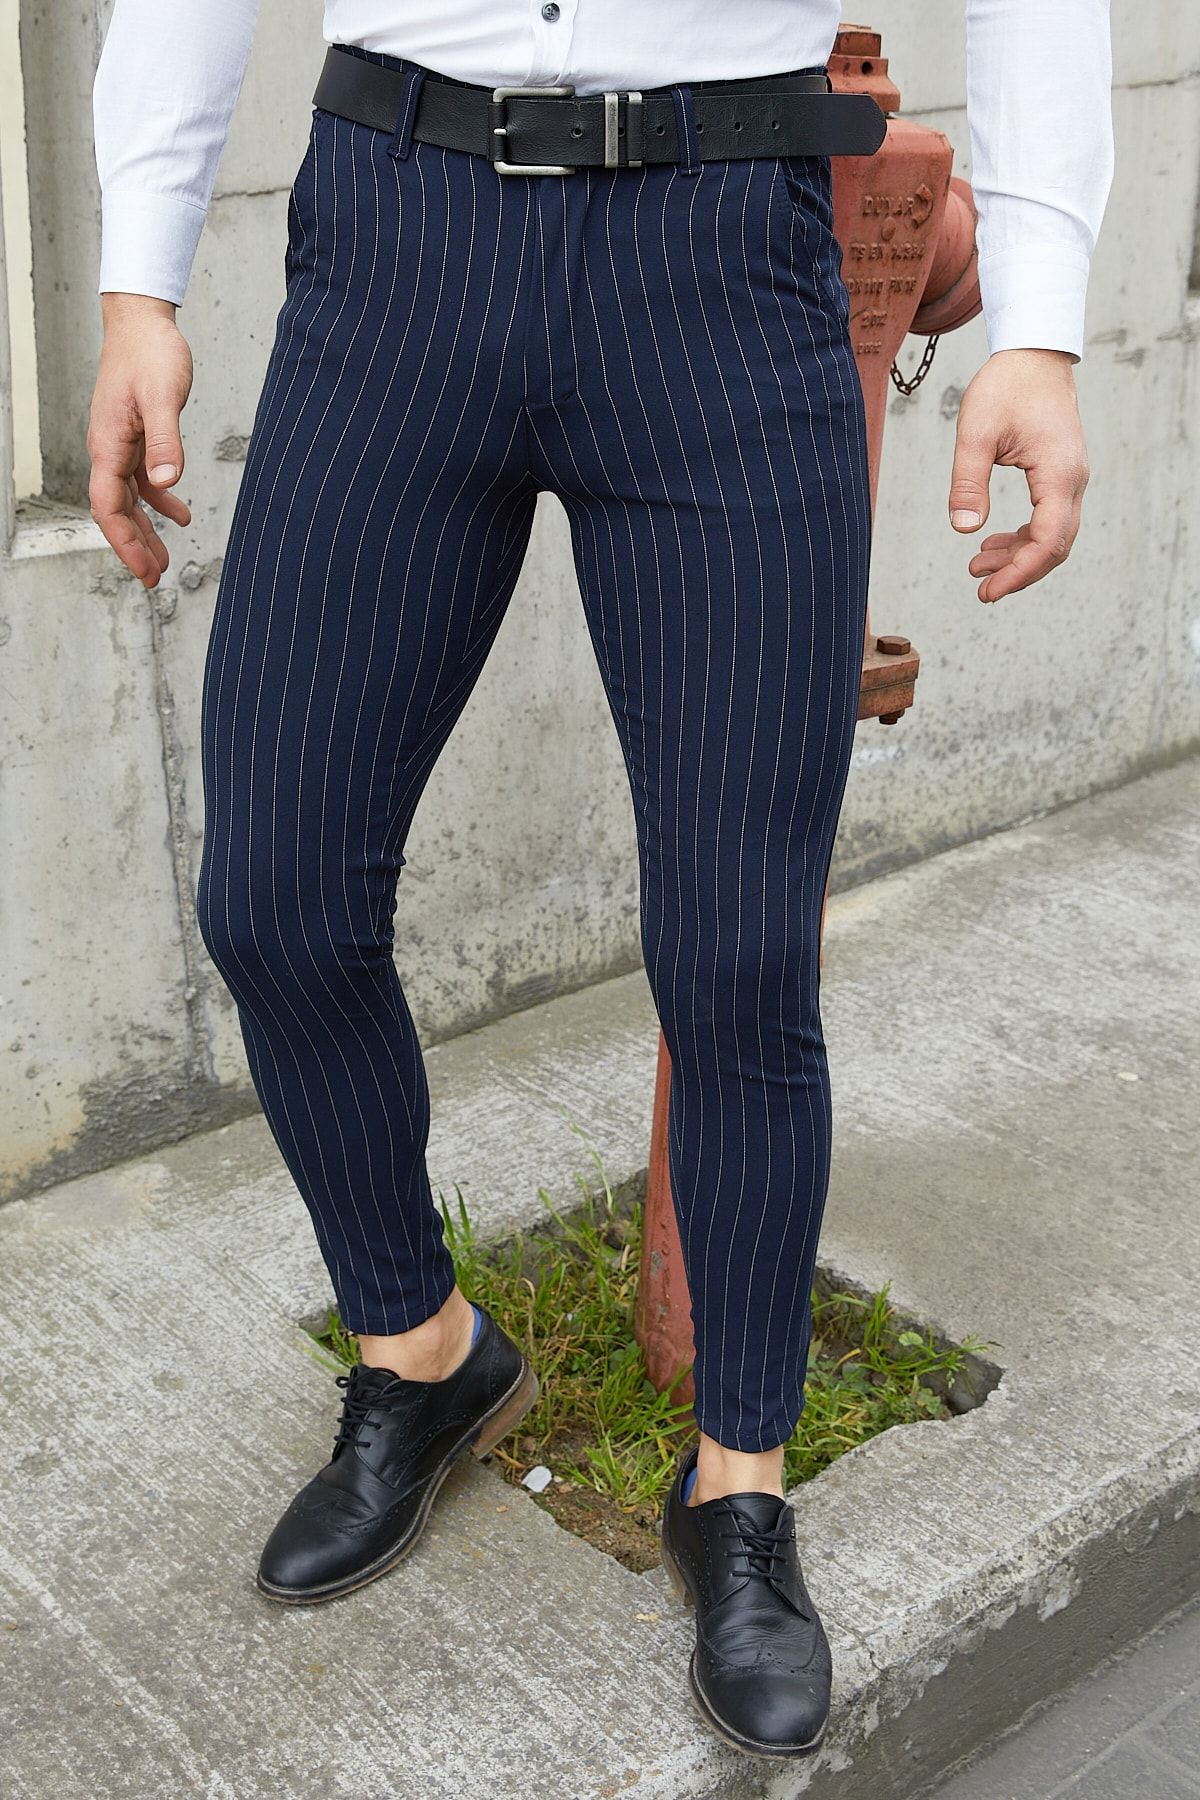 Buy callm 2021 Fashion Clothing, Men's Striped Business Straight Slim Fit  Pants for Daily Work & Life Wear #callm 247831 Online at Low Prices in  India - Amazon.in